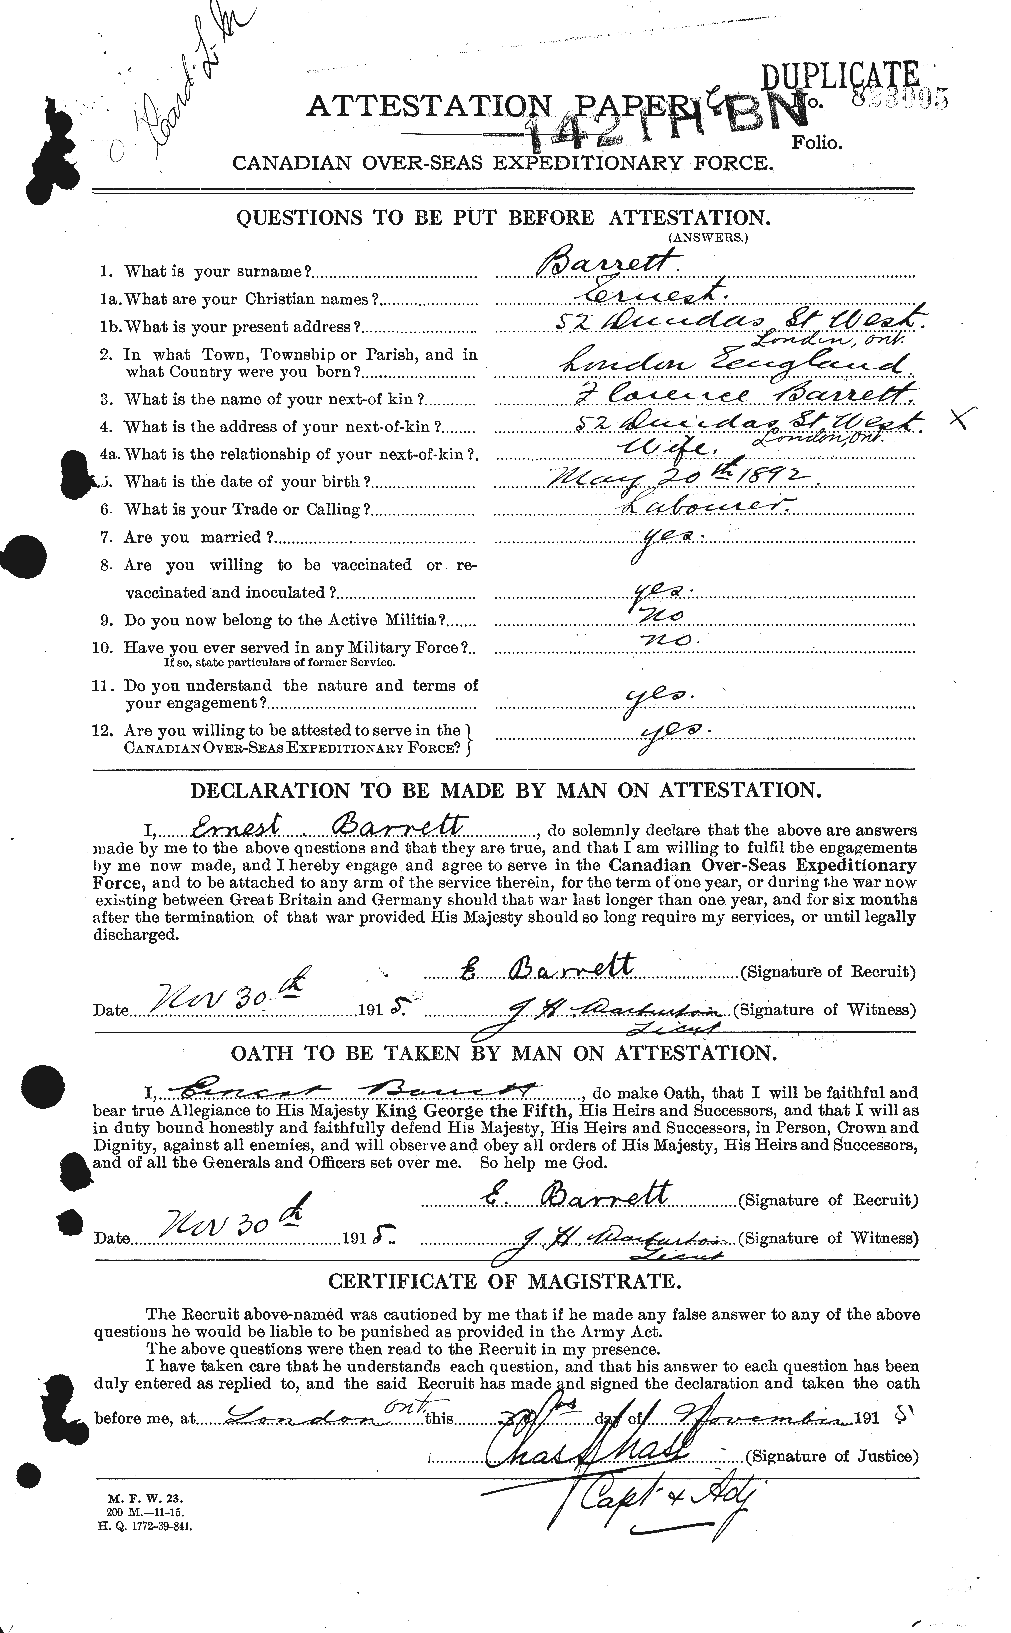 Personnel Records of the First World War - CEF 220350a